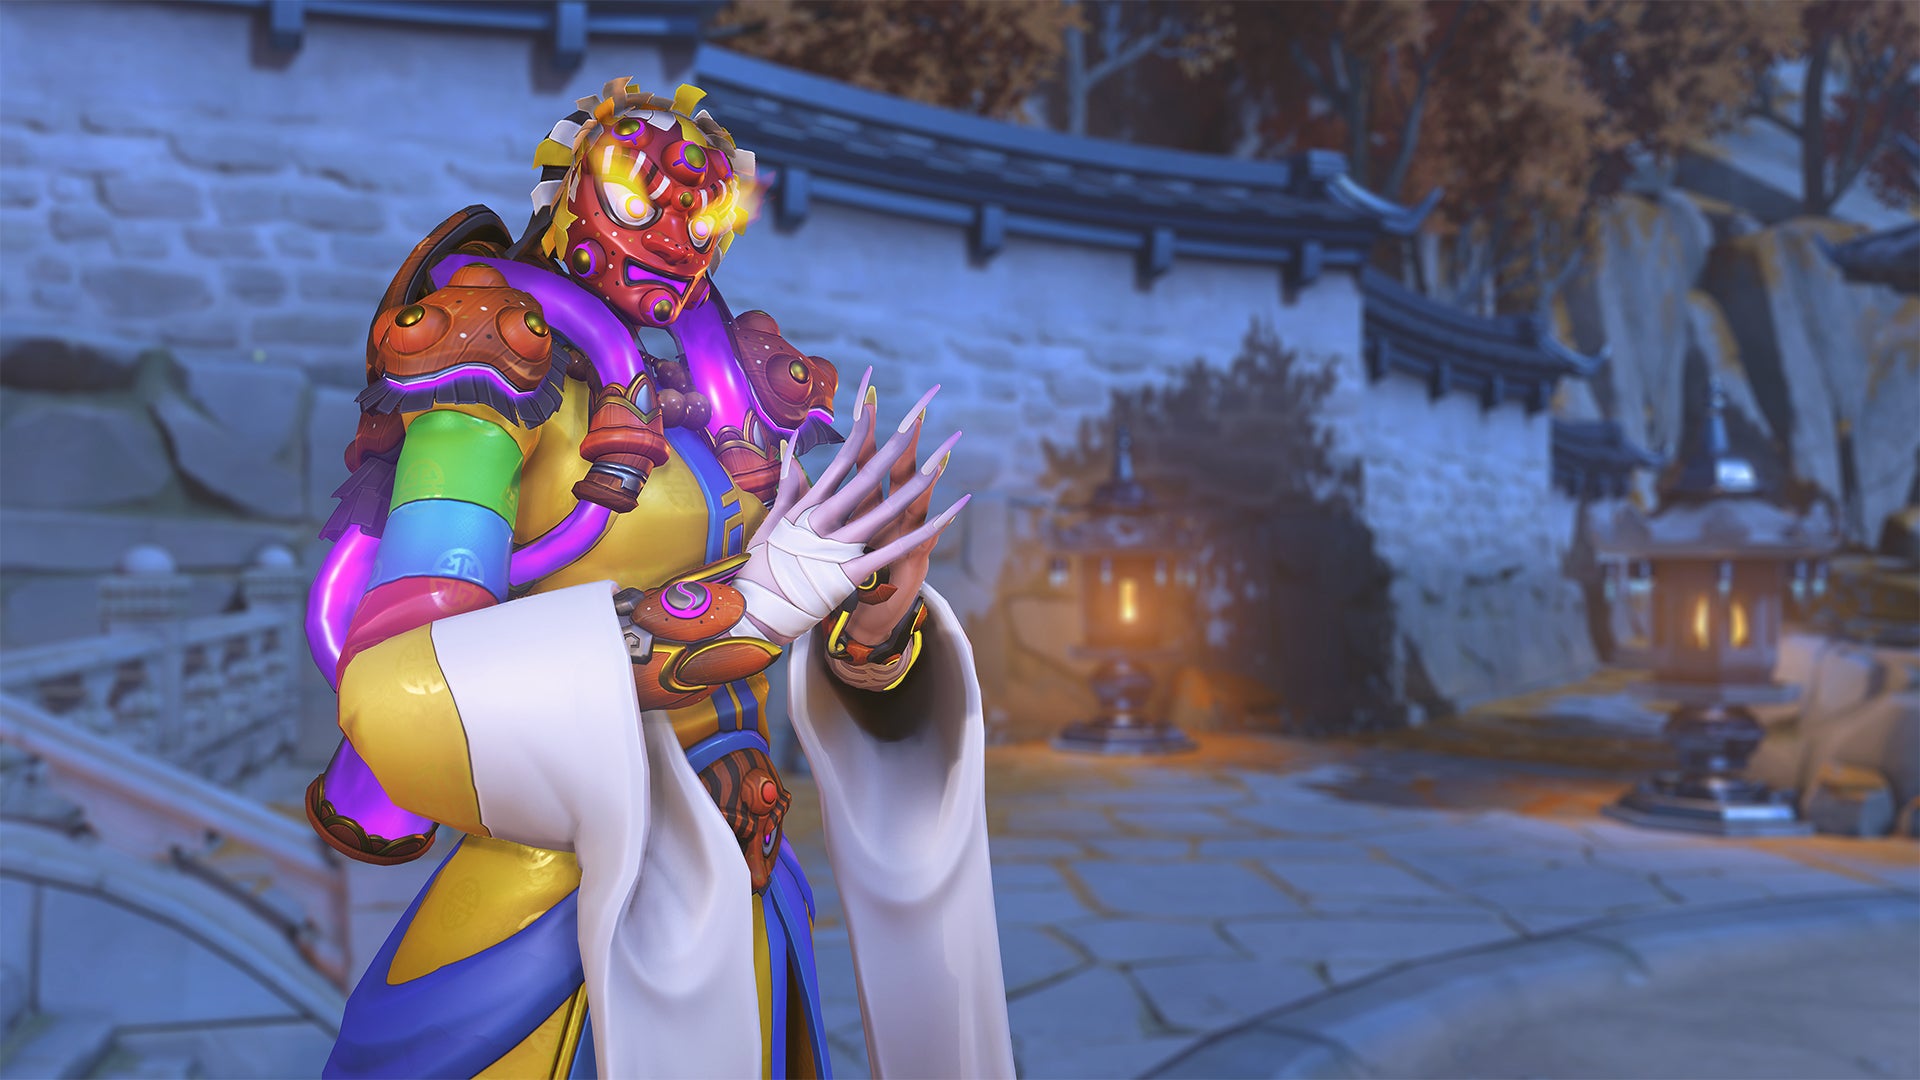 Image for Overwatch 2’s Lunar New Year event adds new skins, Arcade Brawls, and Twitch Drops